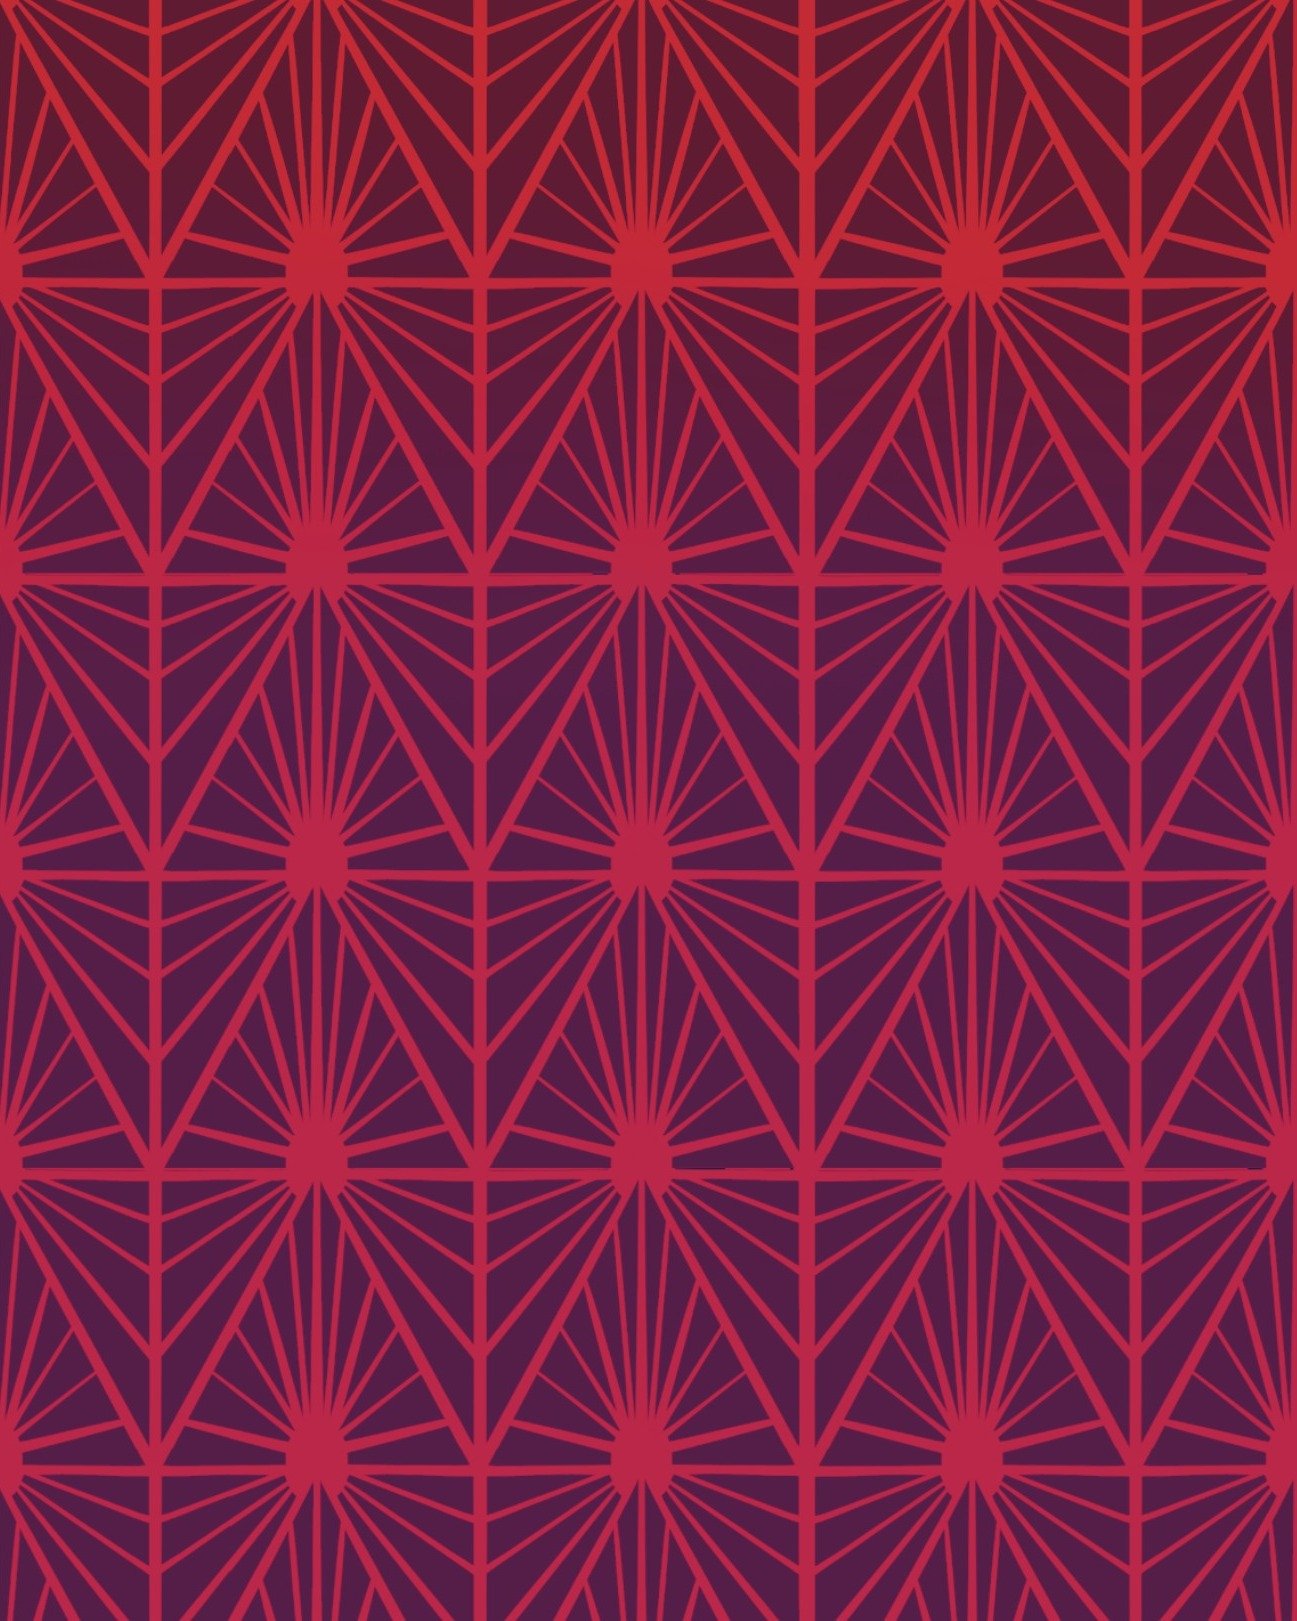 👀🔻 SNEAK PEAK 🔺👀 There's just something so hypnotizing about decorative patterns, RIGHT??? Here are some funky ones I've been working on lately that will be part of a super special digital mural project coming soon. 

Instead of painting, this mu